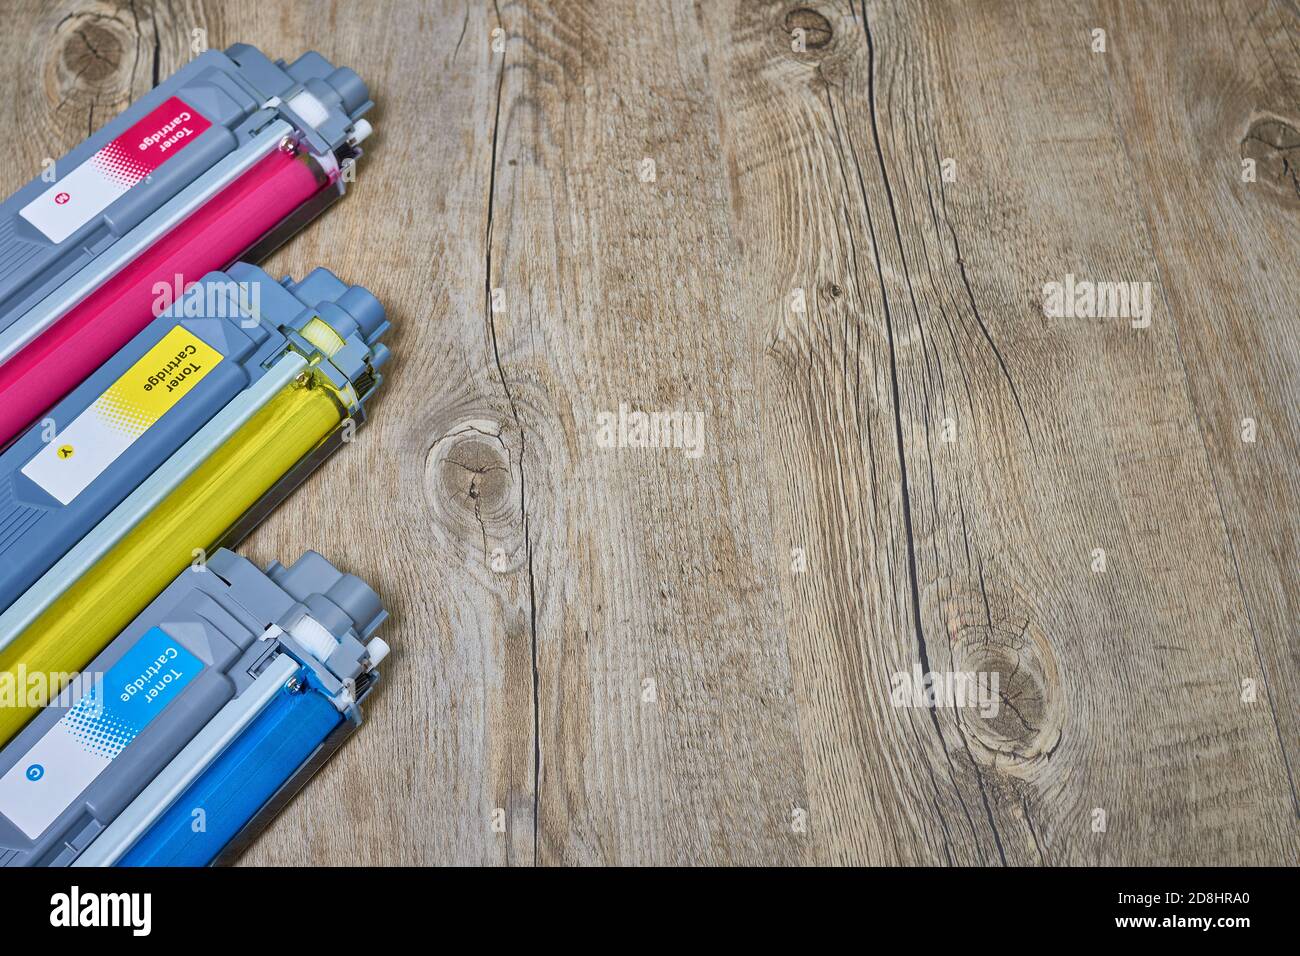 cyan, magenta and yellow toner cartridges for color laser printer on wood Stock Photo